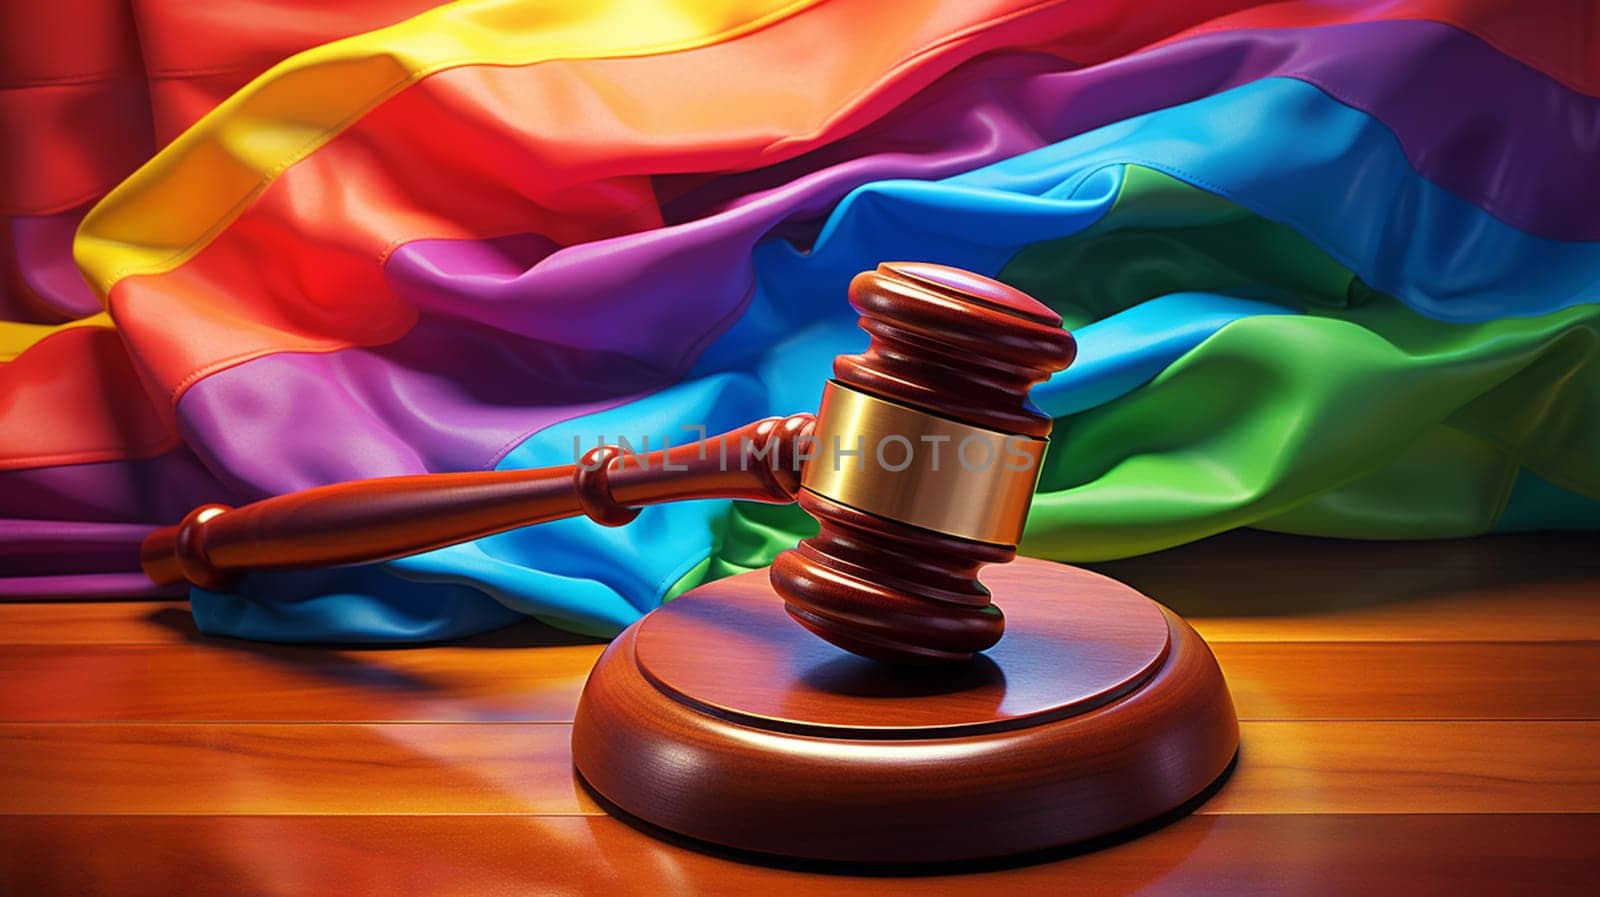 Lgbtq laws, lawsuit and legislation concept with a wooden judge gavel and lgbt pride rainbow flag colors on background 3D illustration. by Andelov13